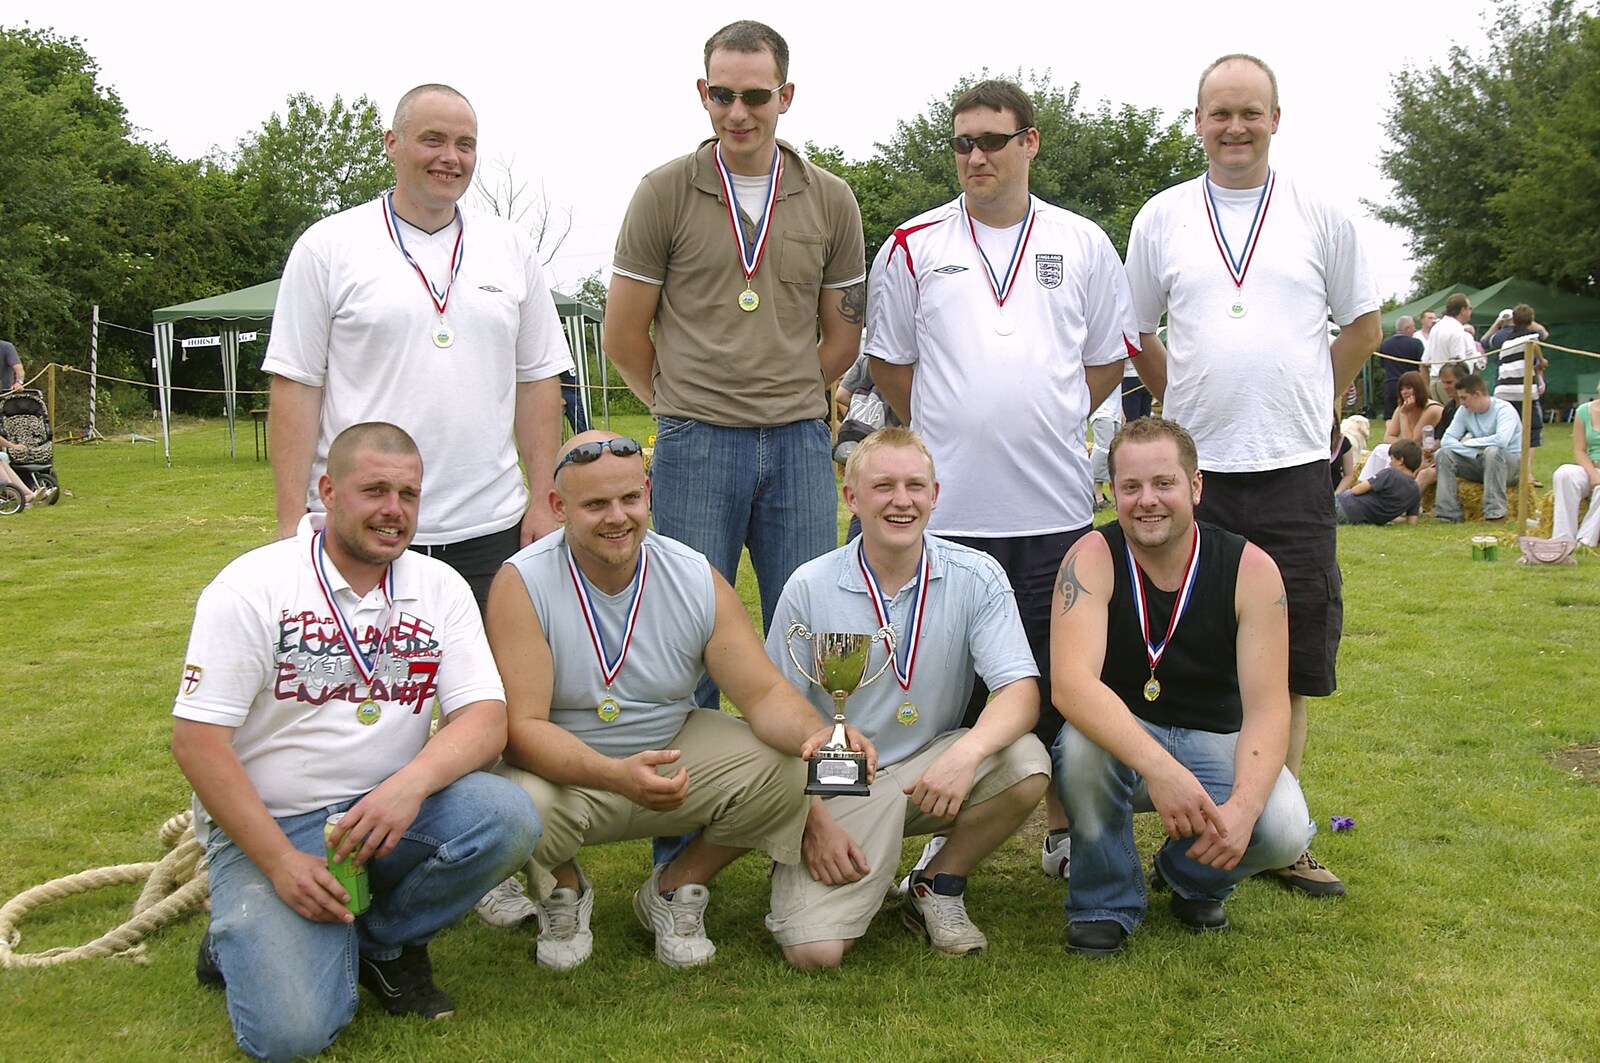 The winners of the tug 'o' war pose for a photo from The Village Fête, Yaxley, Suffolk - 18th June 2006